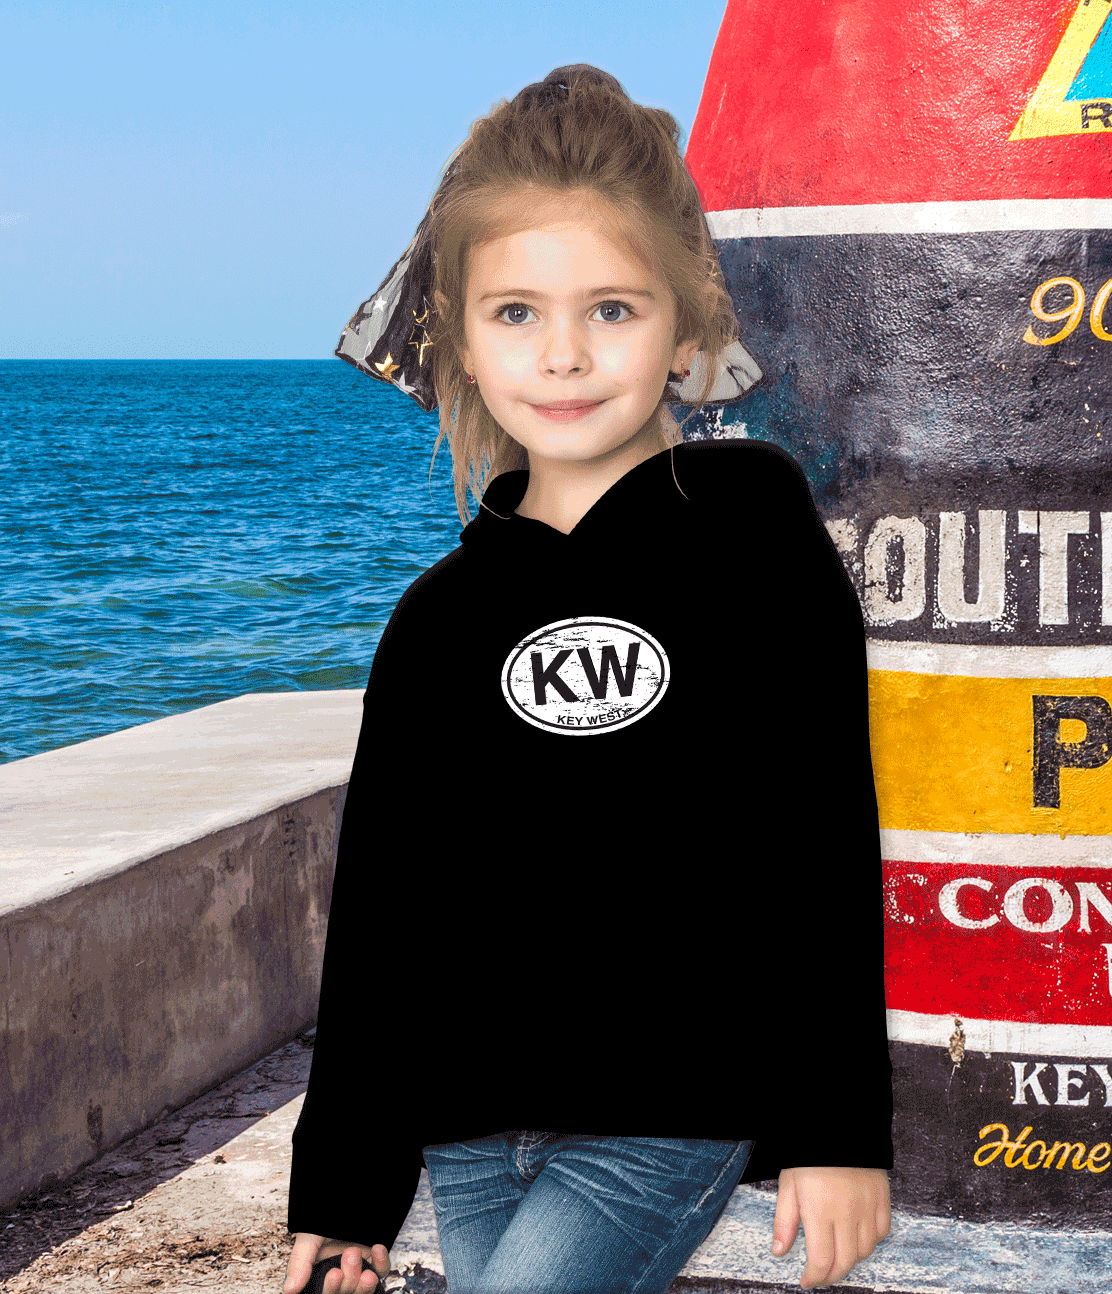 Key West Classic Youth Hoodie Souvenir Gift - My Destination Location